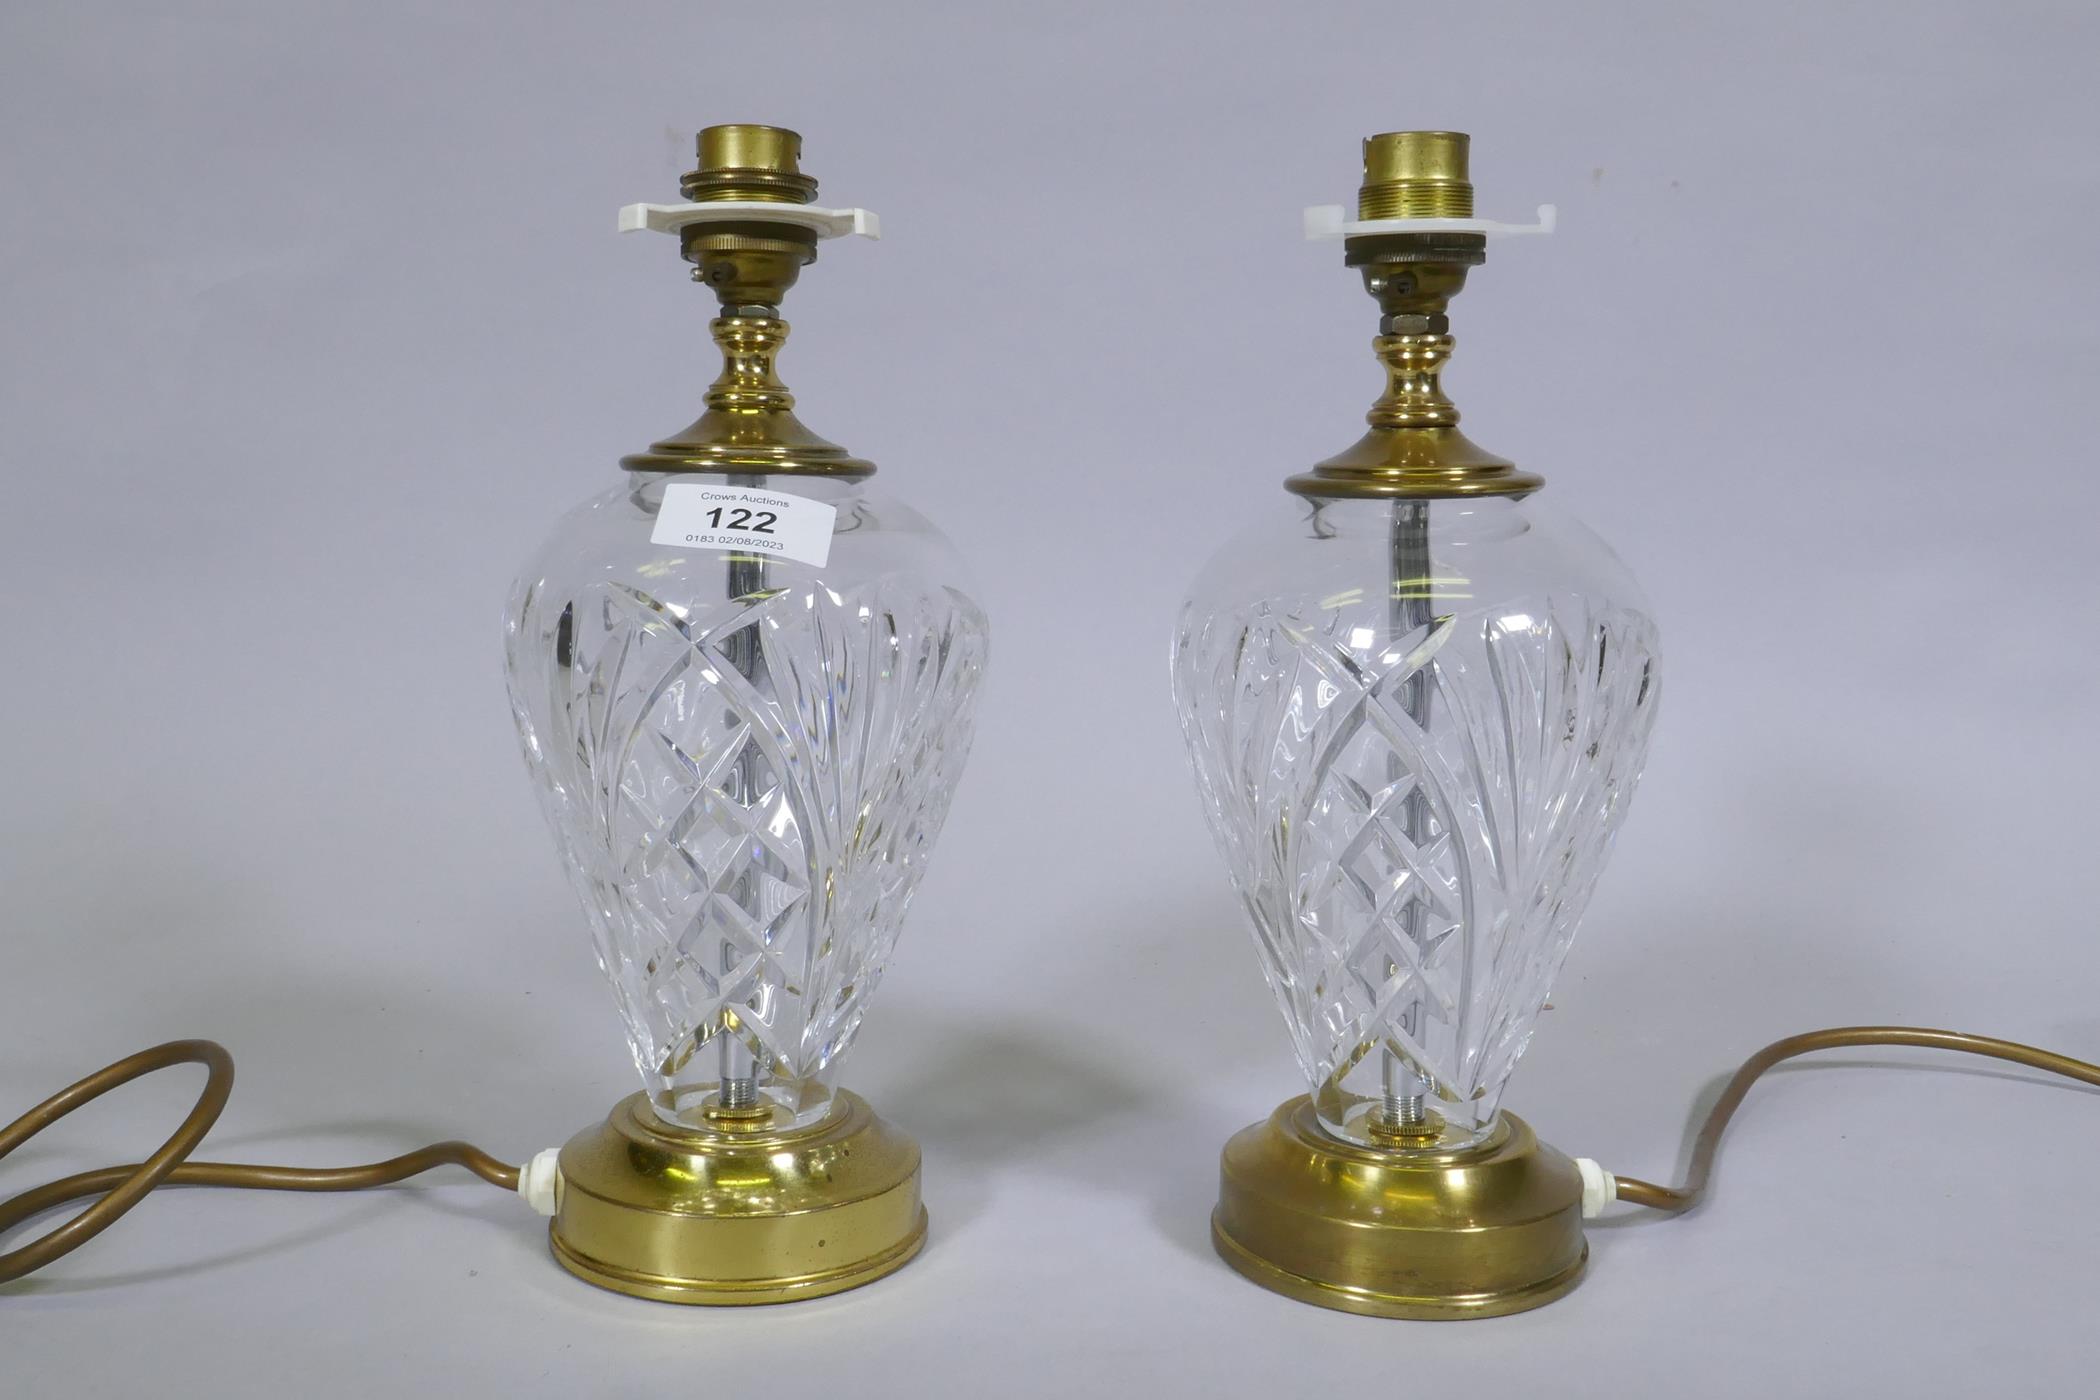 A pair of Waterford 'Kilkenny' crystal glass table lamps, 27cm high